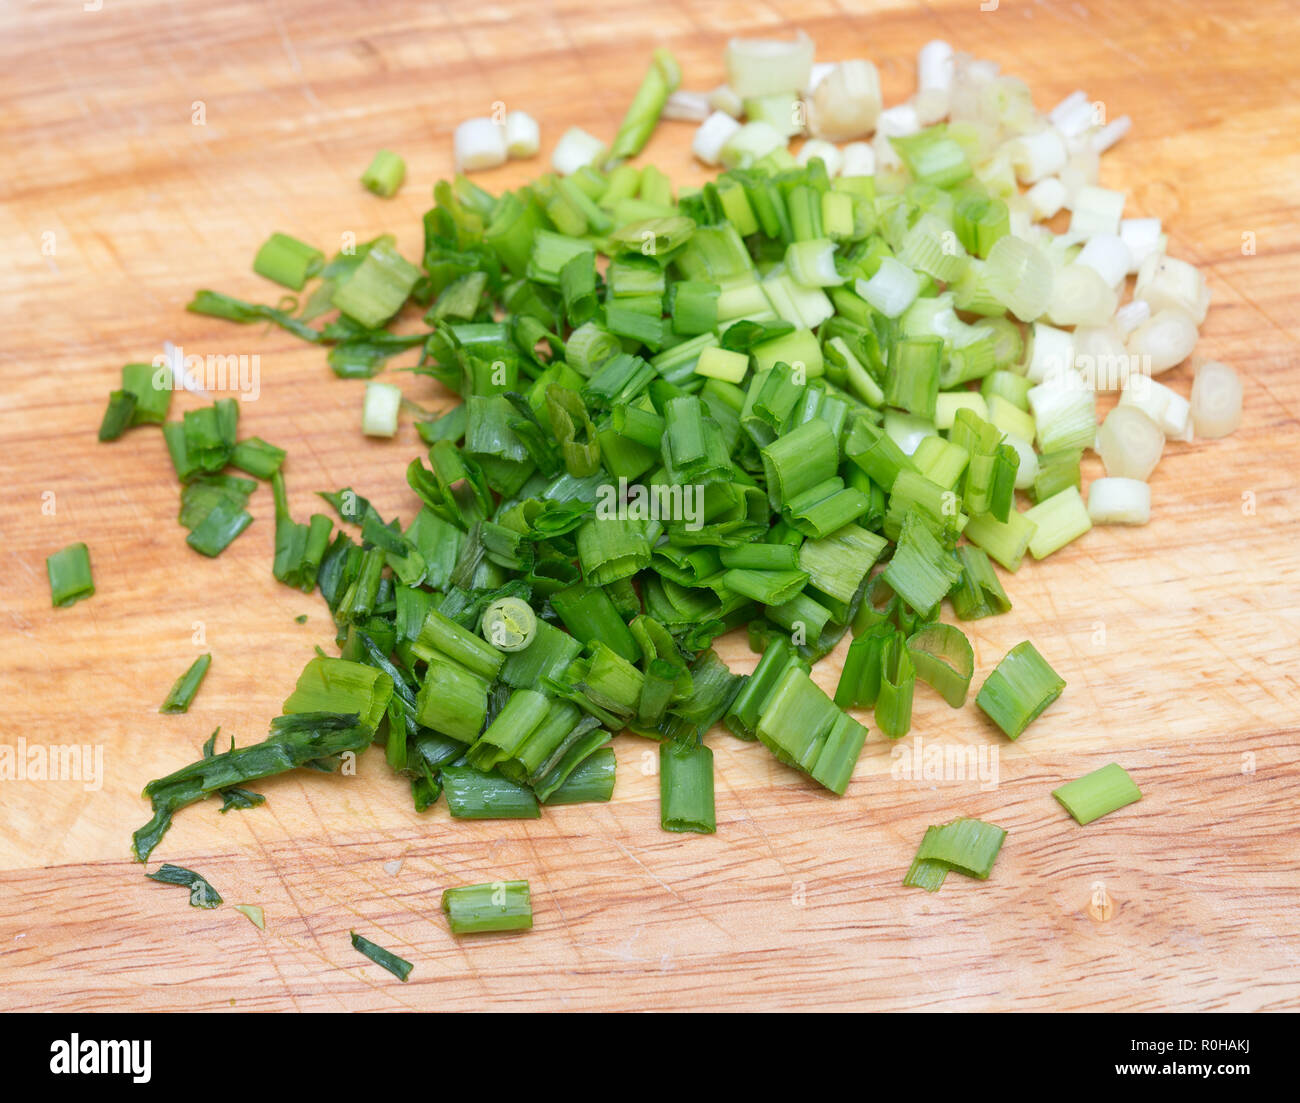 Handful Of Finely Chopped Green Onions On Striped Wooden Board Stock Photo,  Picture and Royalty Free Image. Image 40966933.